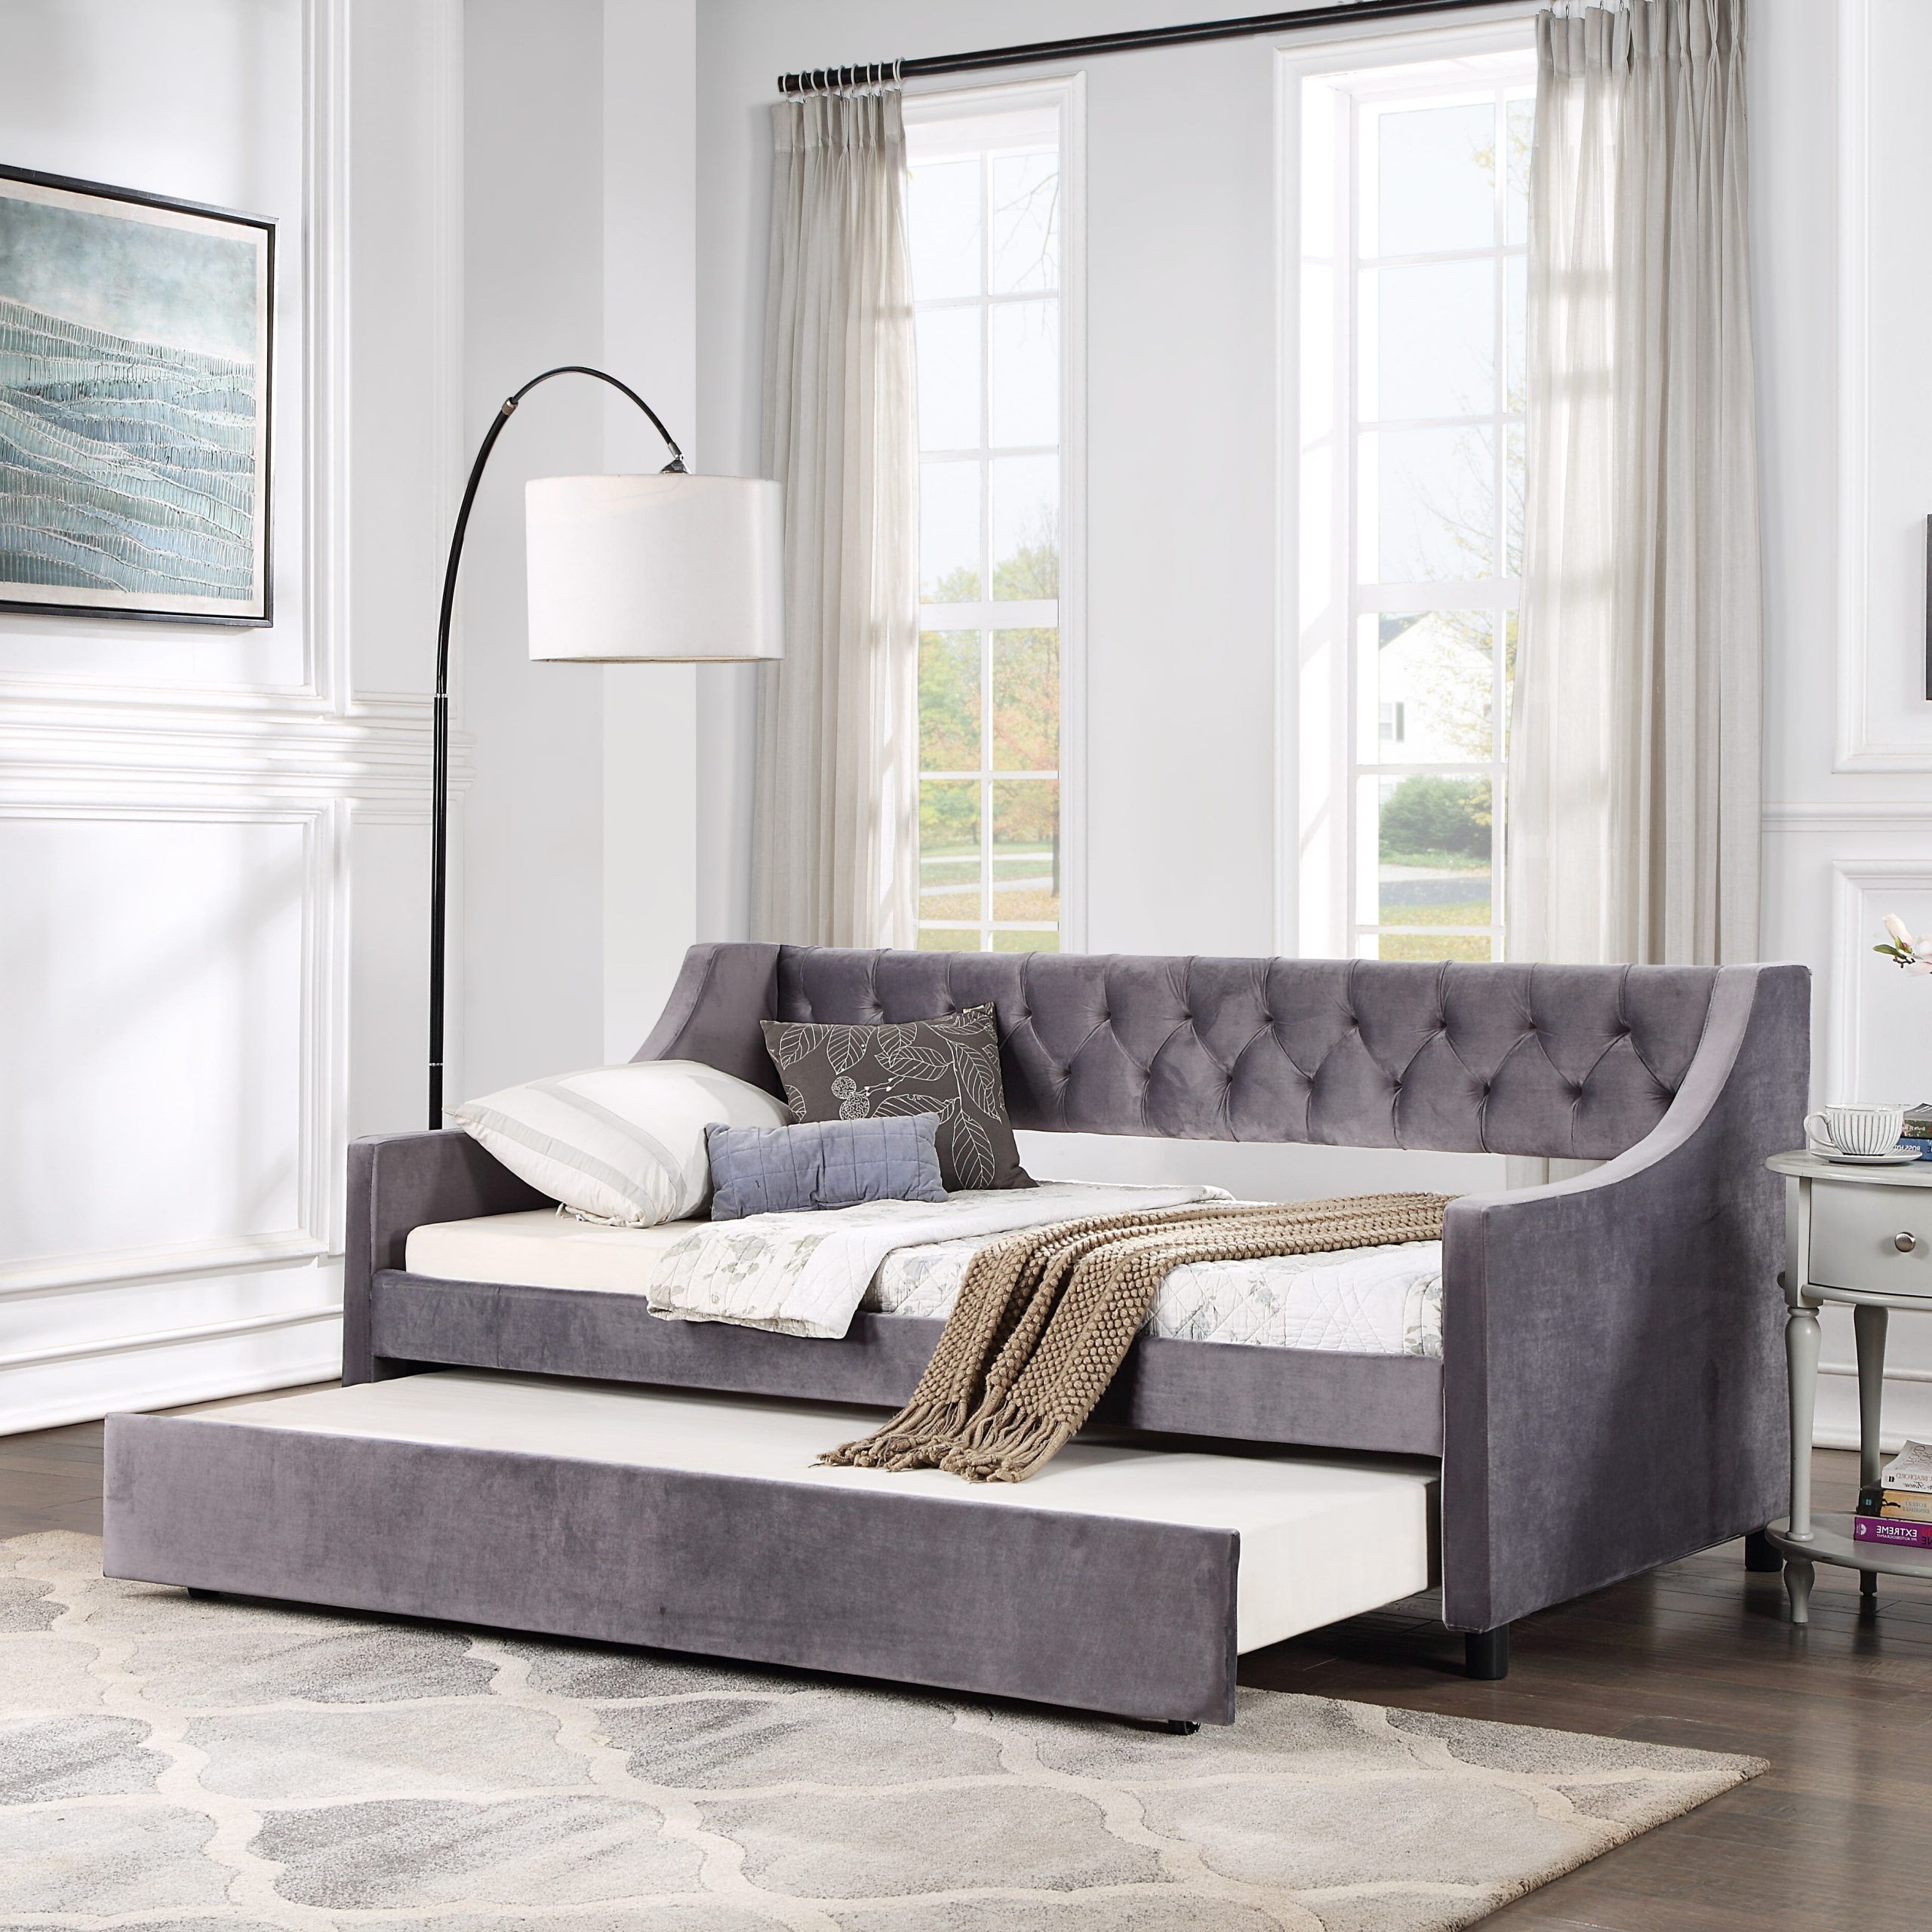 Overdrive Pull Out Sofa Bed With Upholstered Tufted Daybed Sleeper Sofa For 2 In 1 Gray Pull Out Sofa Beds (View 3 of 20)